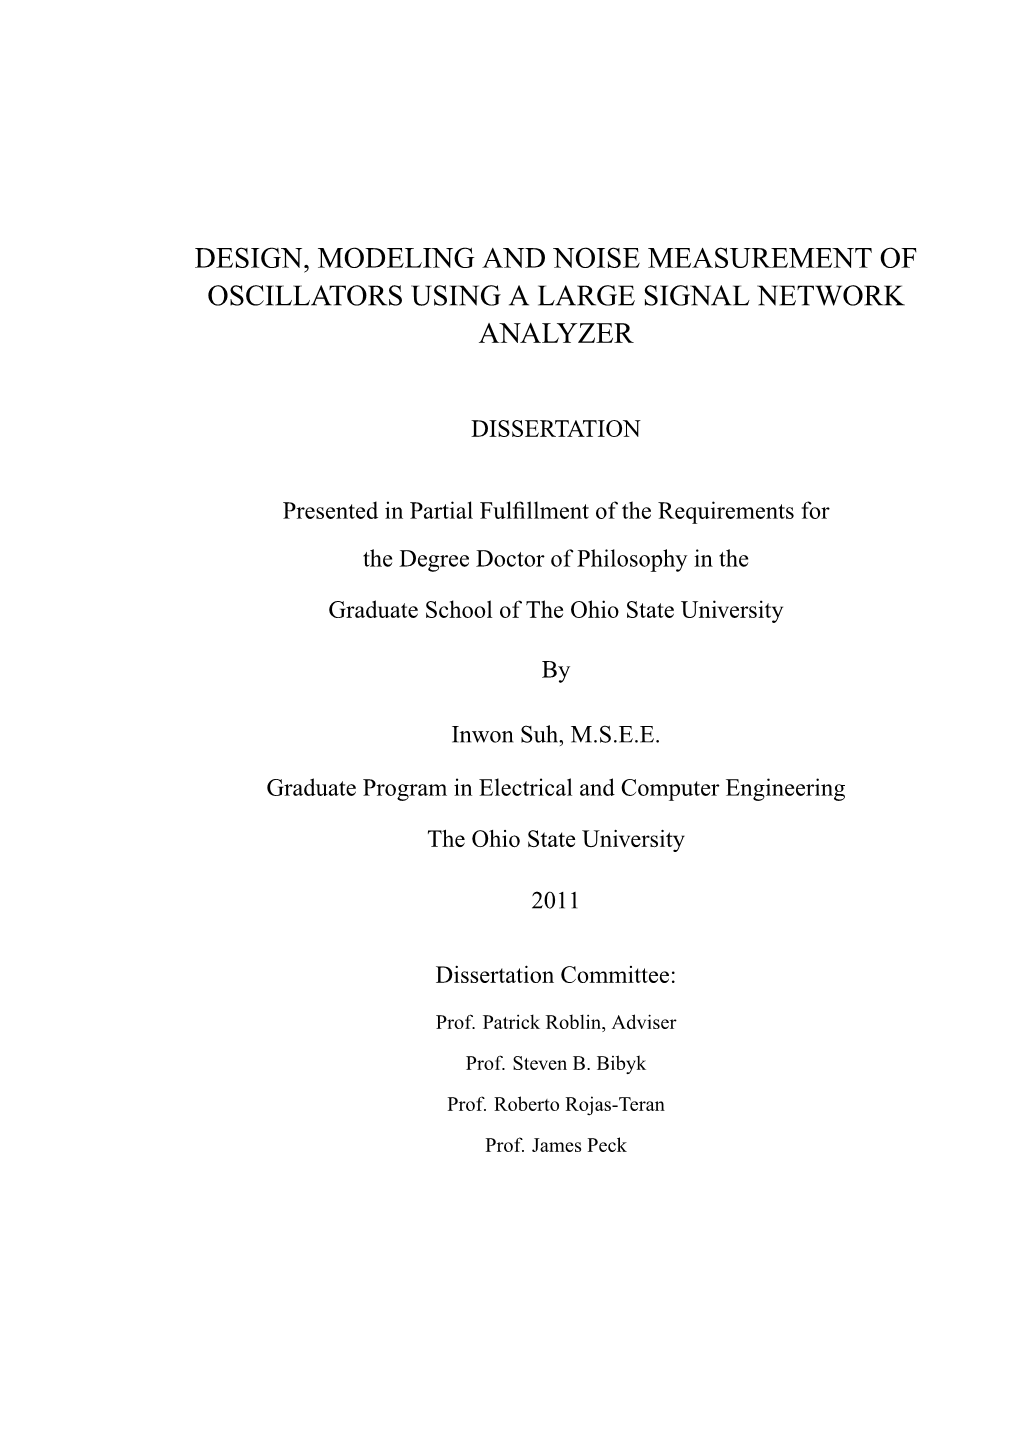 Design, Modeling and Noise Measurement of Oscillators Using a Large Signal Network Analyzer